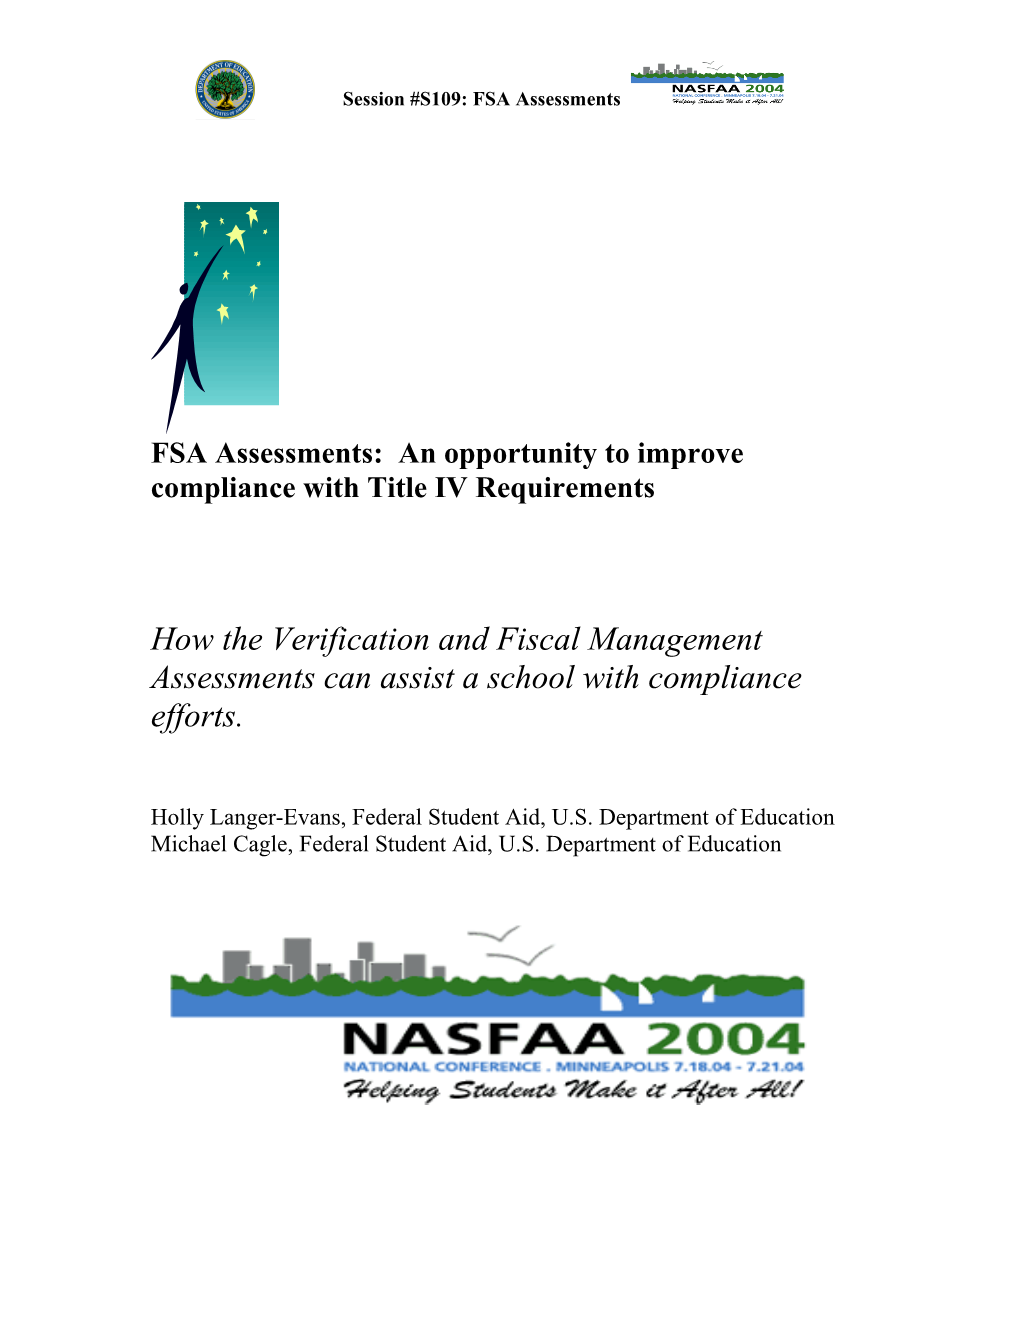 FSA Assessments: an Opportunity to Improve Compliance with Title IV Requirements